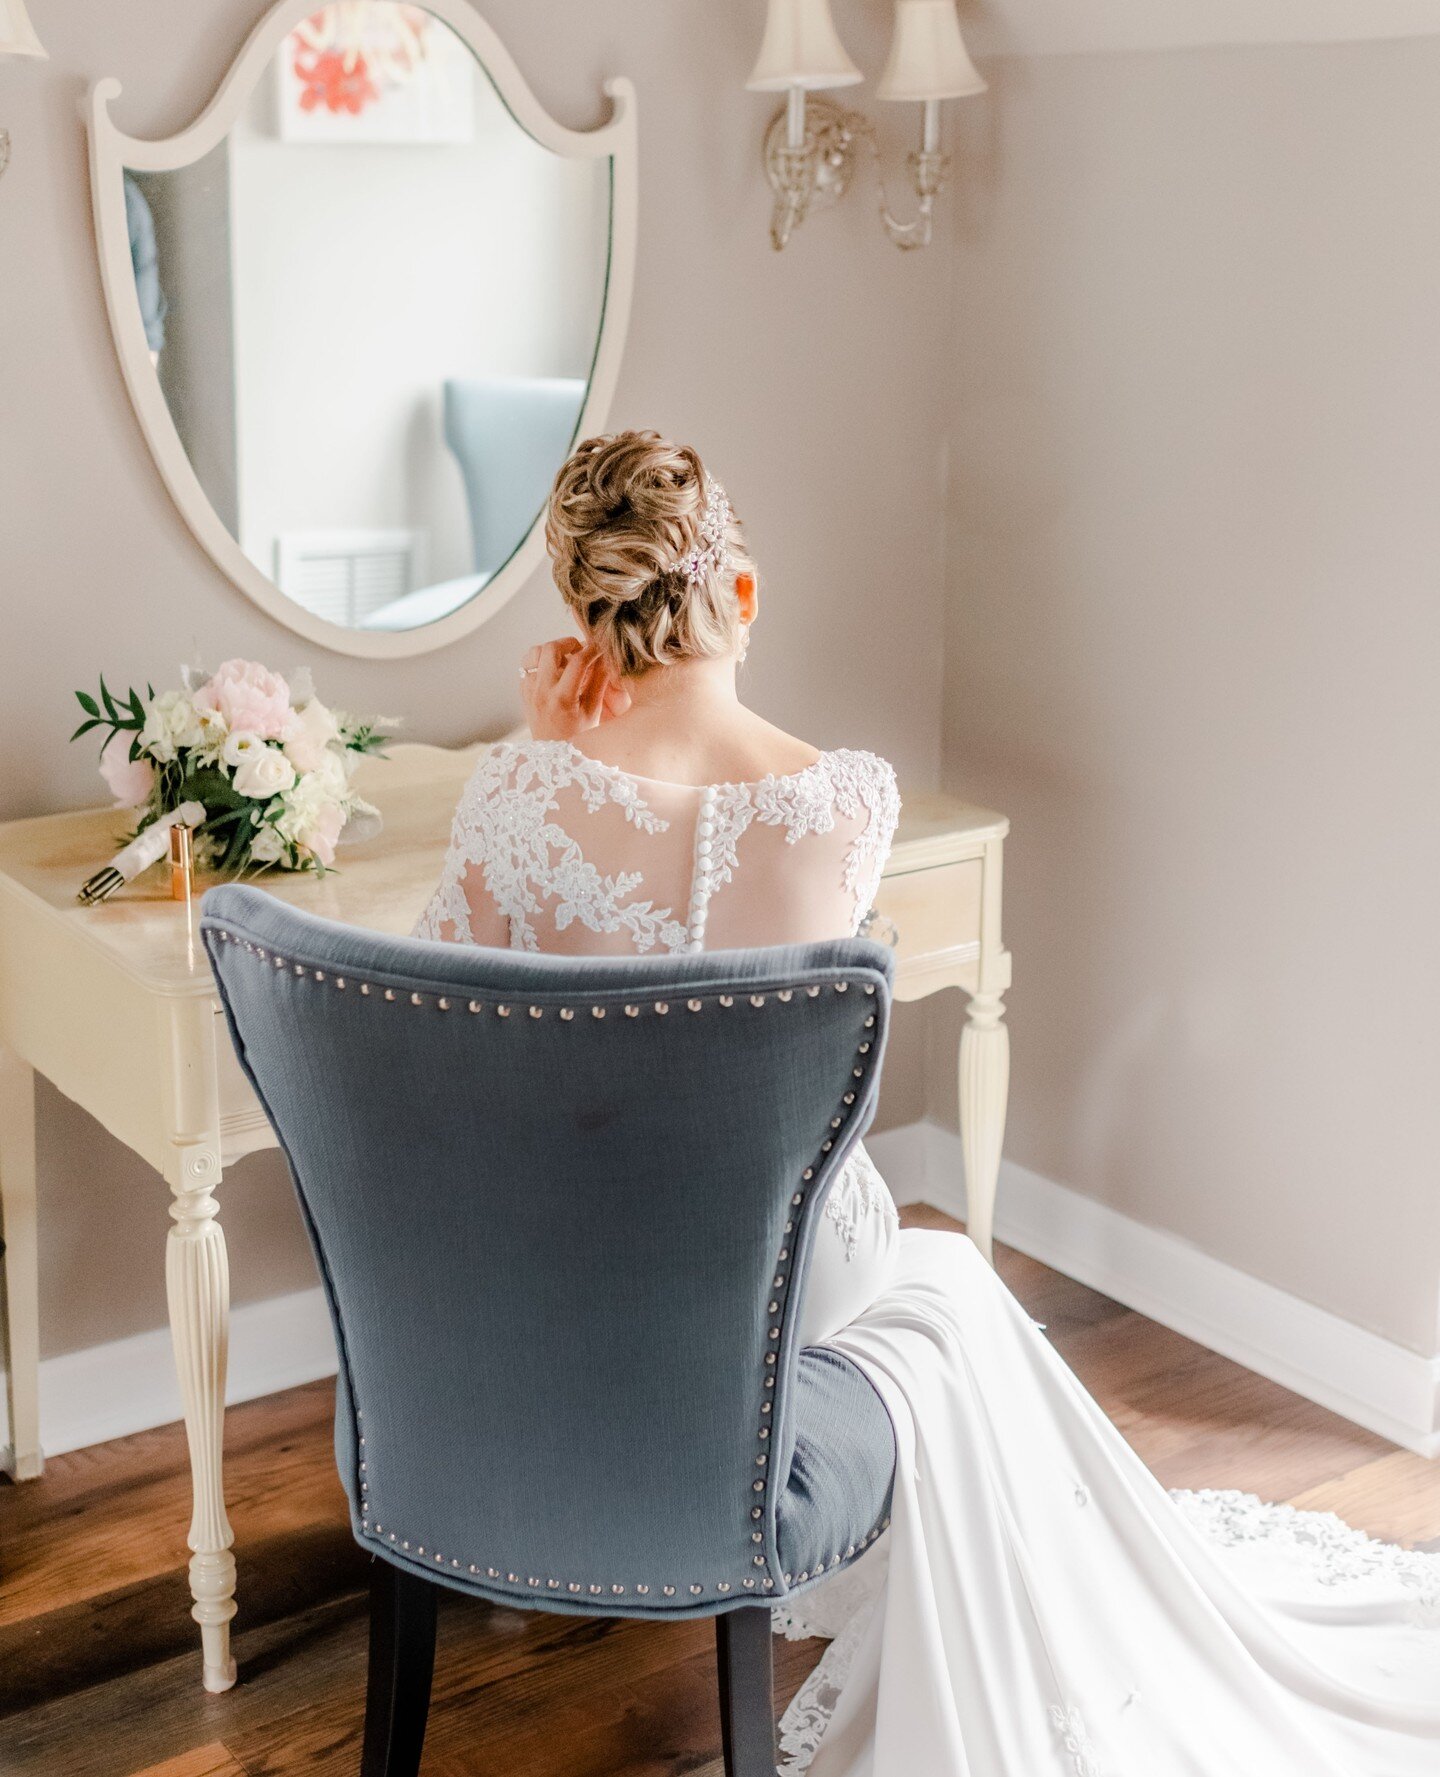 There is just something magical that happens in the bridal suite!⁠
⁠
Photographer: @deborahannphotography⁠
Venue: @lakealhallaclub⁠
Wedding gown: @camillelavie⁠
Bridesmaids Dresses: @davidsbridal⁠
Bride's Shoes: @davidsbridal⁠
Justin's Suit: @bbespok